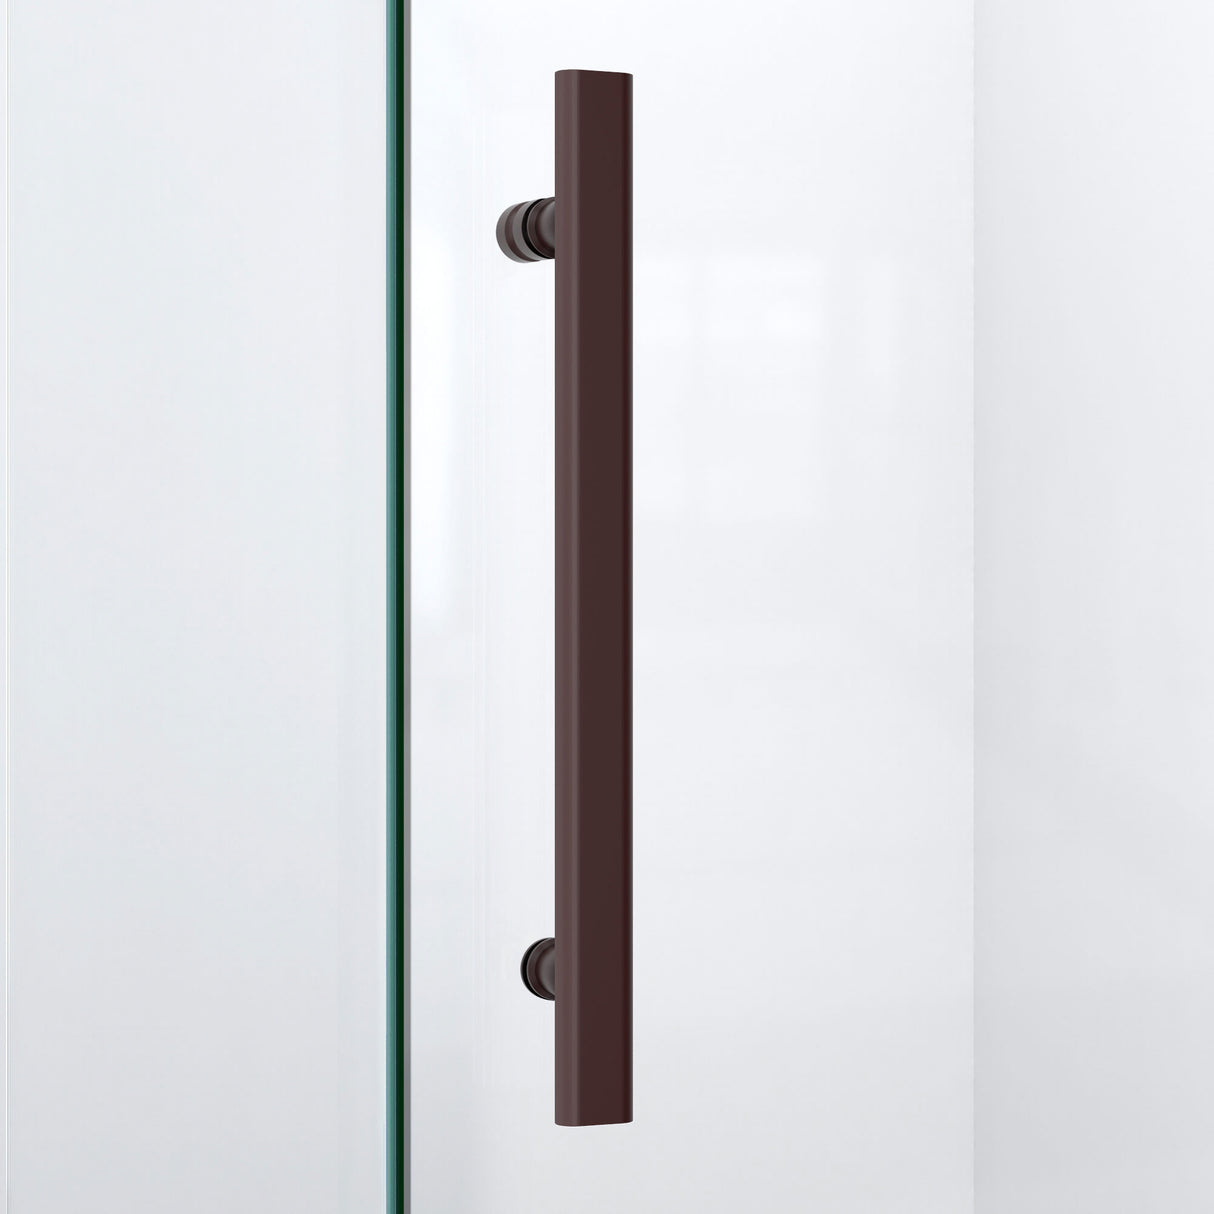 DreamLine Quatra Lux 34 1/4 in. D x 46 3/8 in. W x 72 in. H Frameless Hinged Shower Enclosure in Oil Rubbed Bronze